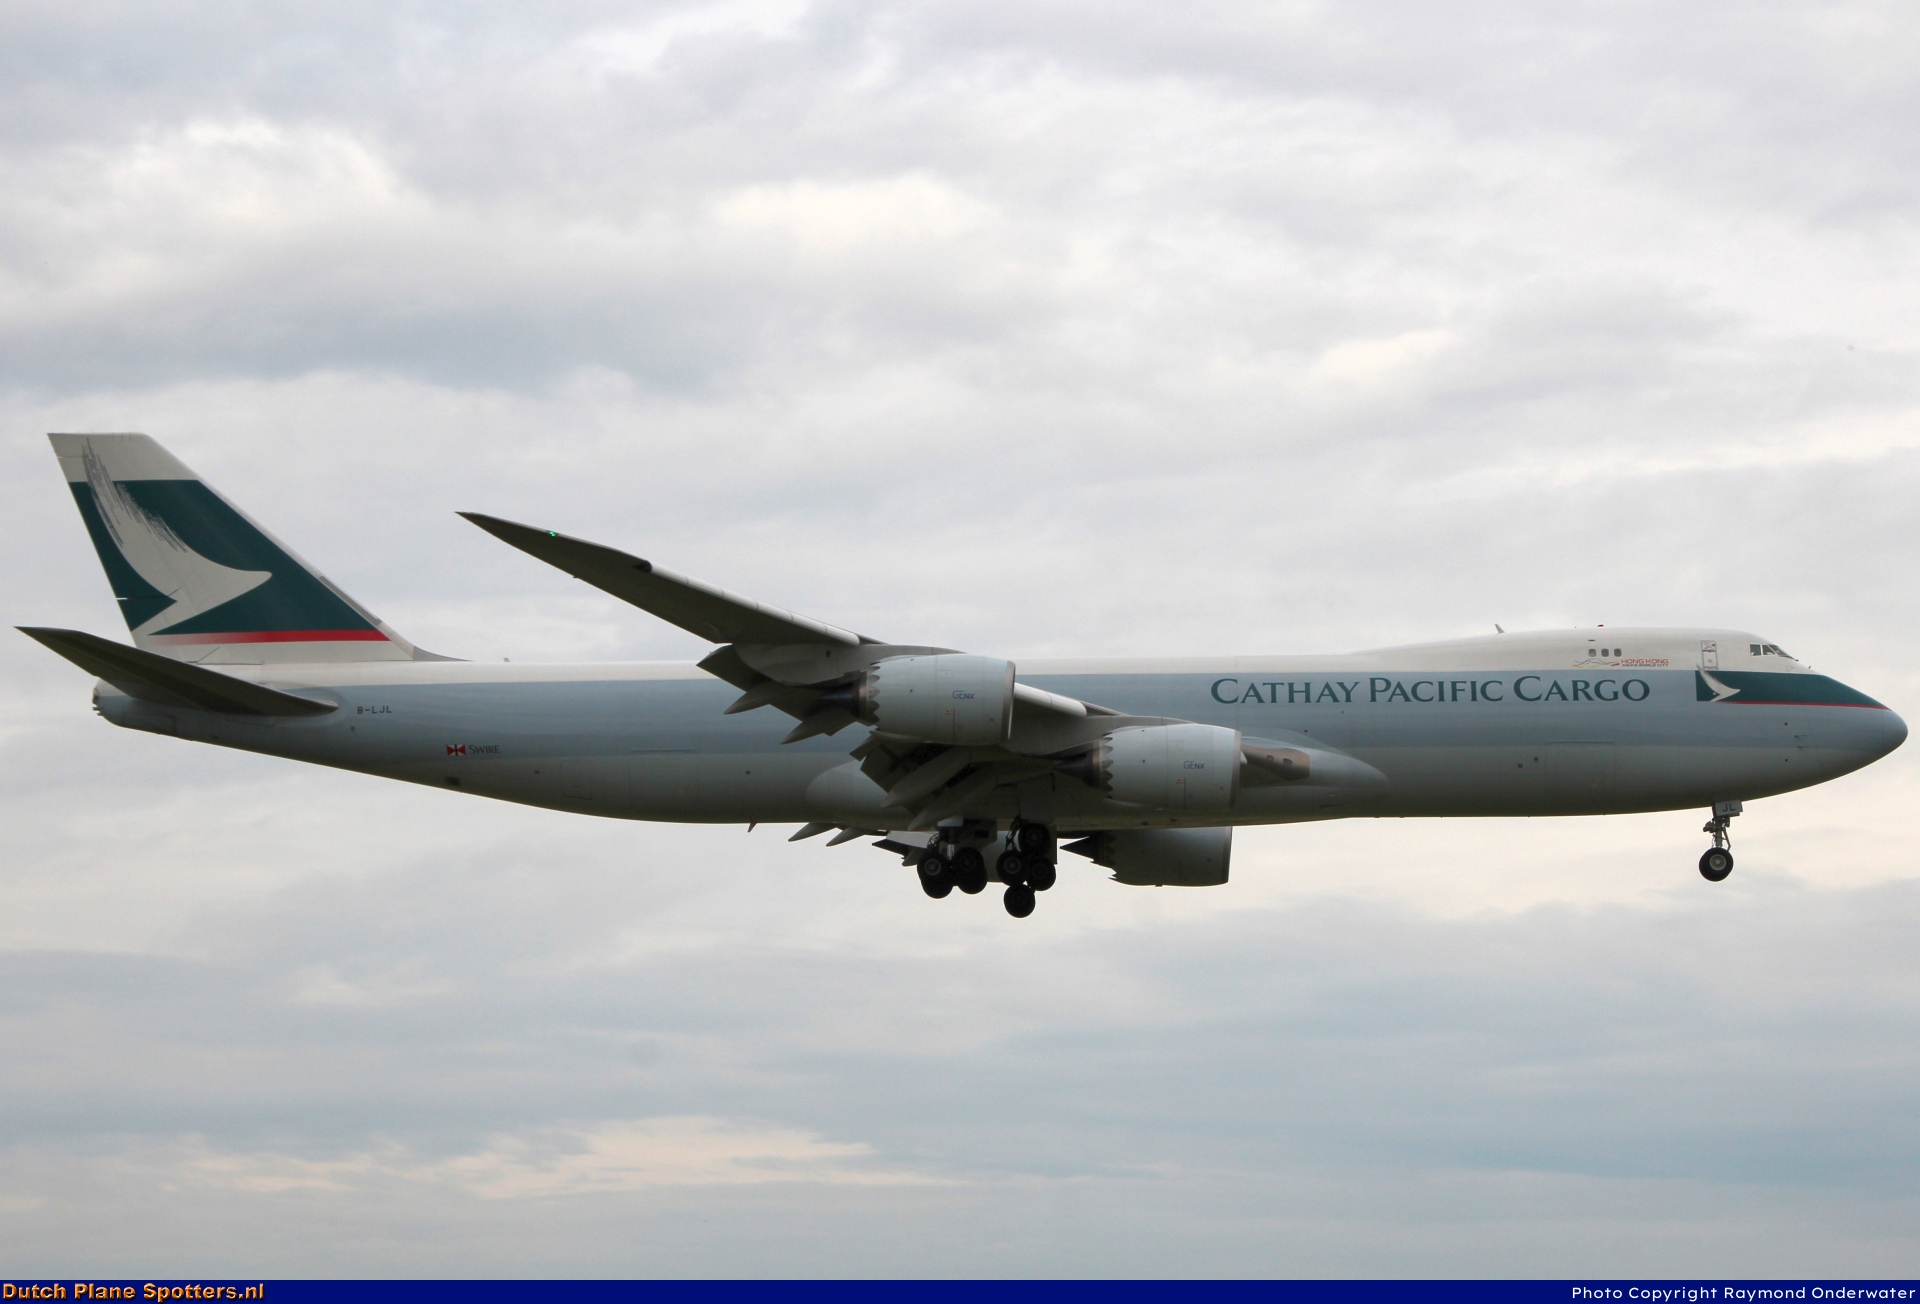 B-LJL Boeing 747-8 Cathay Pacific Cargo by Raymond Onderwater